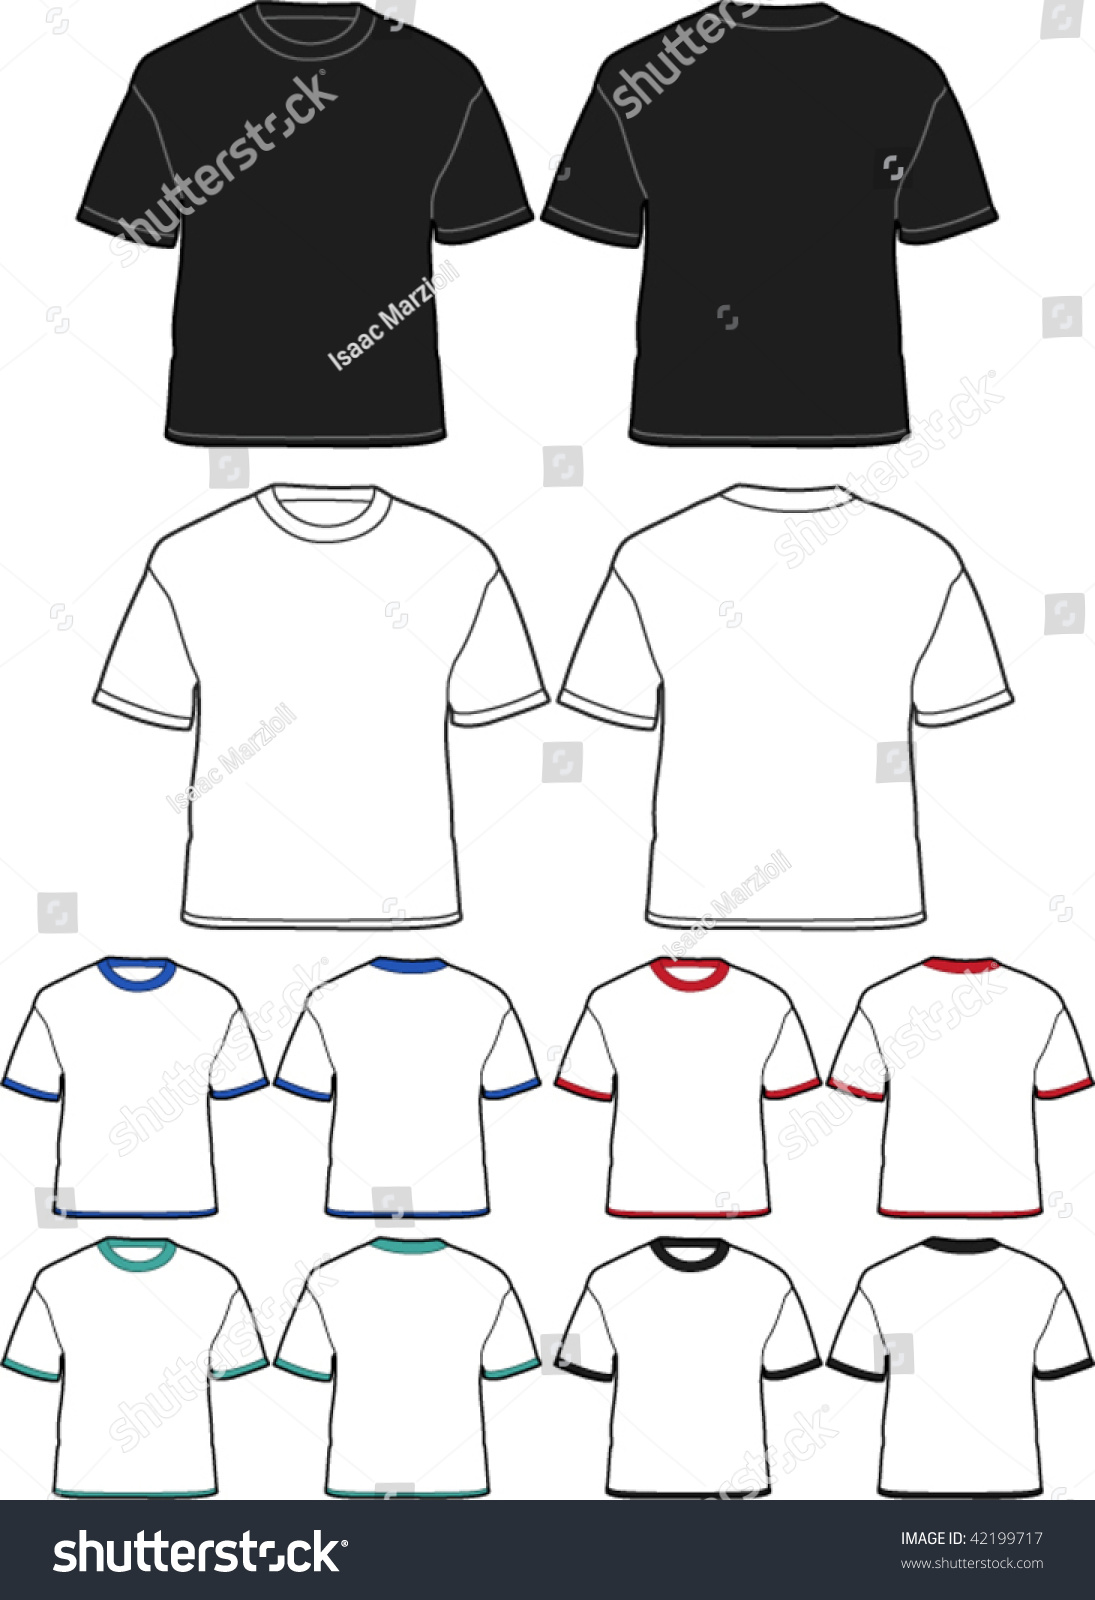 T-Shirt Template - Front And Back - Vector Illustrations - 42199717 ...